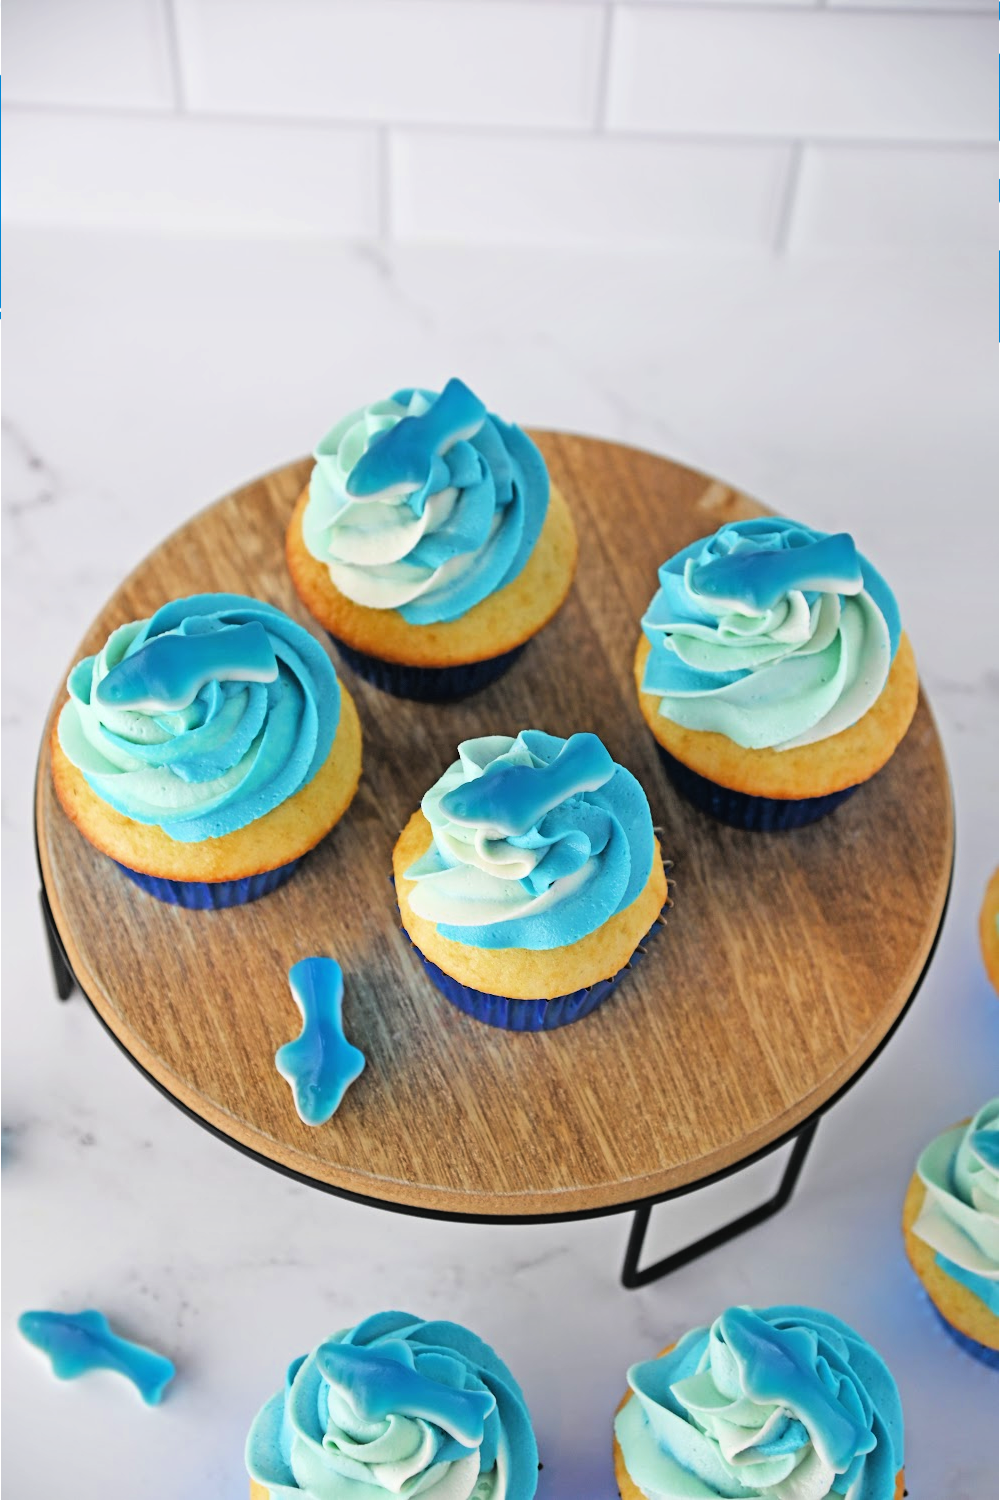 Looking from above at homemade shark cupcakes with ombre blue icing and gummy sharks.